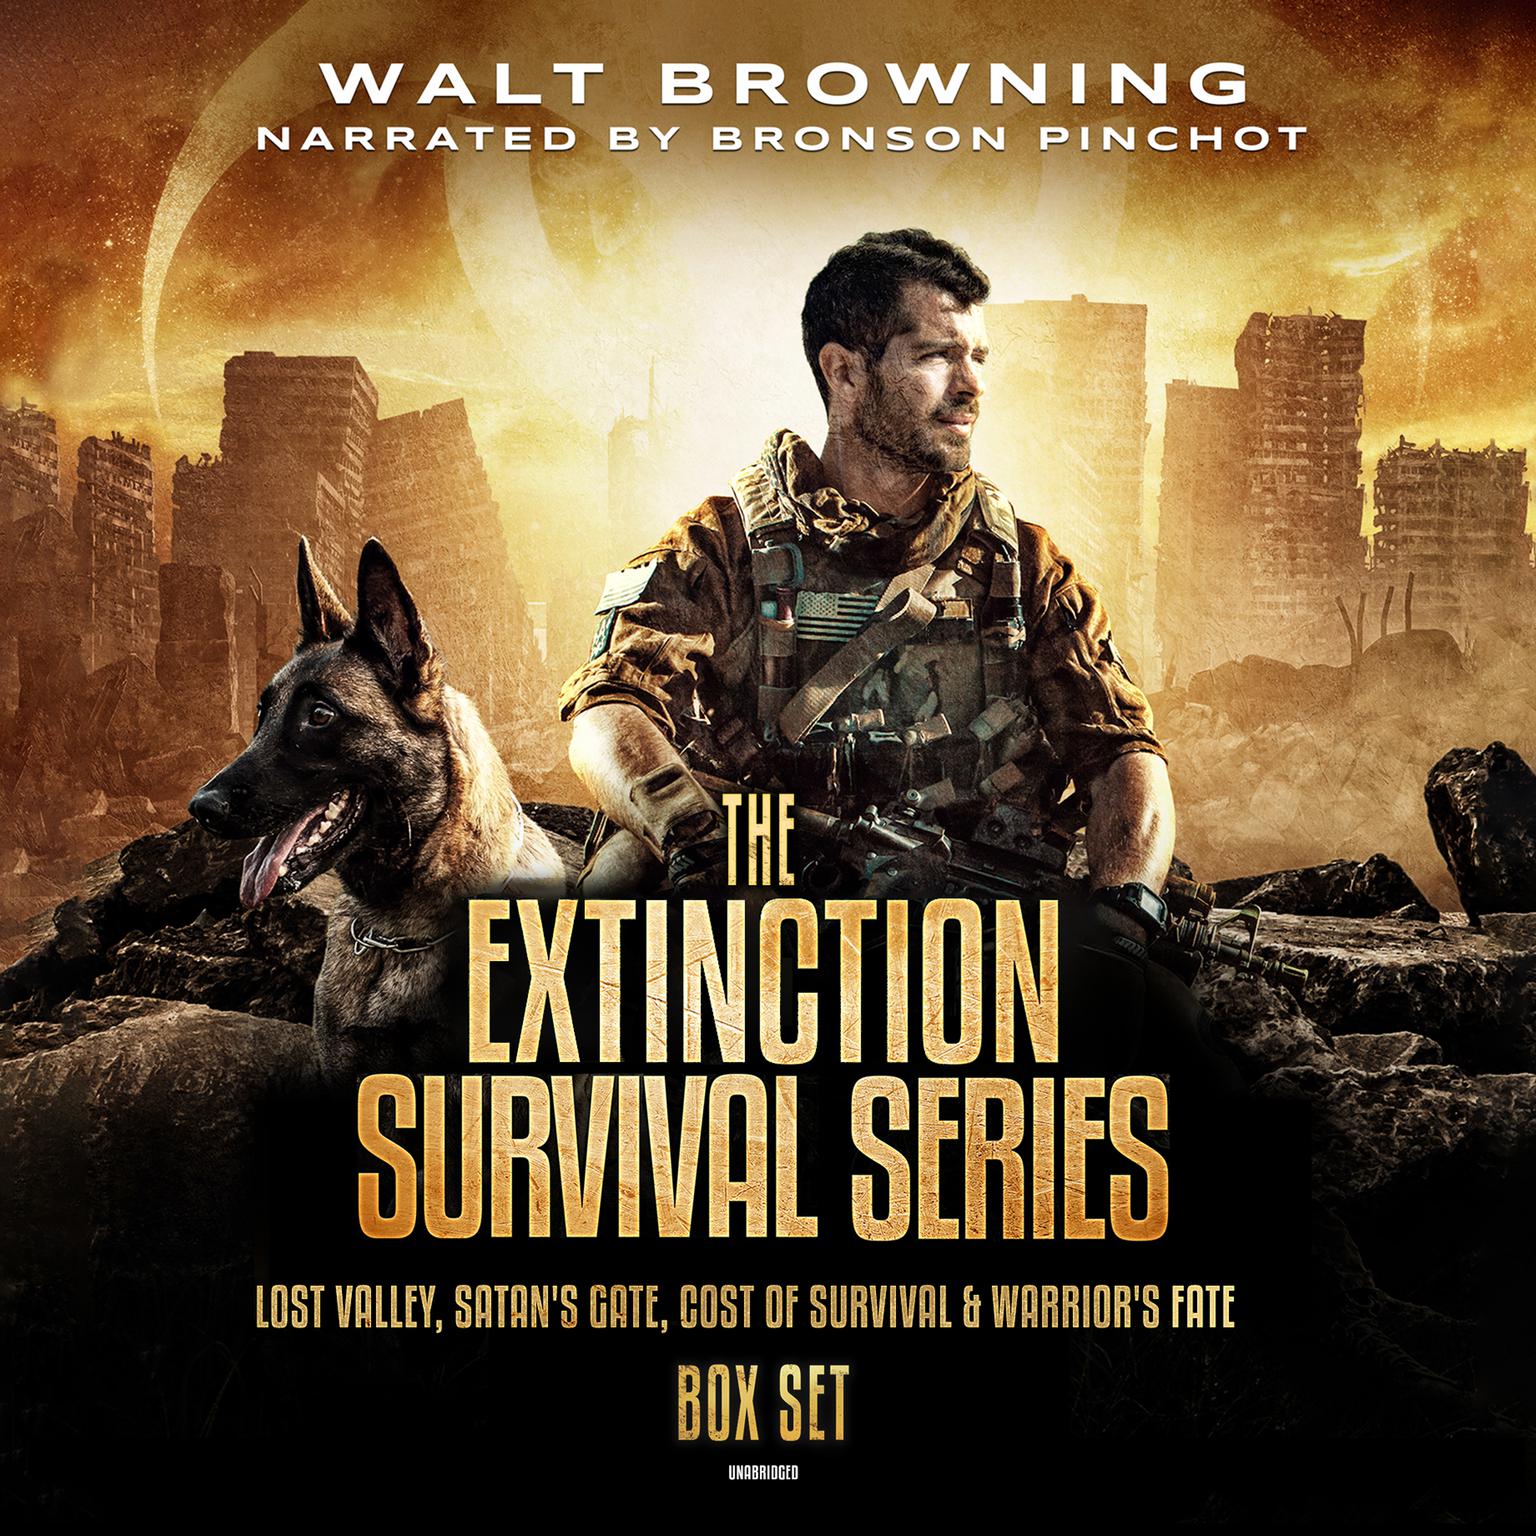 The Extinction Survival Series Box Set: Lost Valley, Satans Gate, Cost of Survival & Warriors Fate Audiobook, by Walt Browning